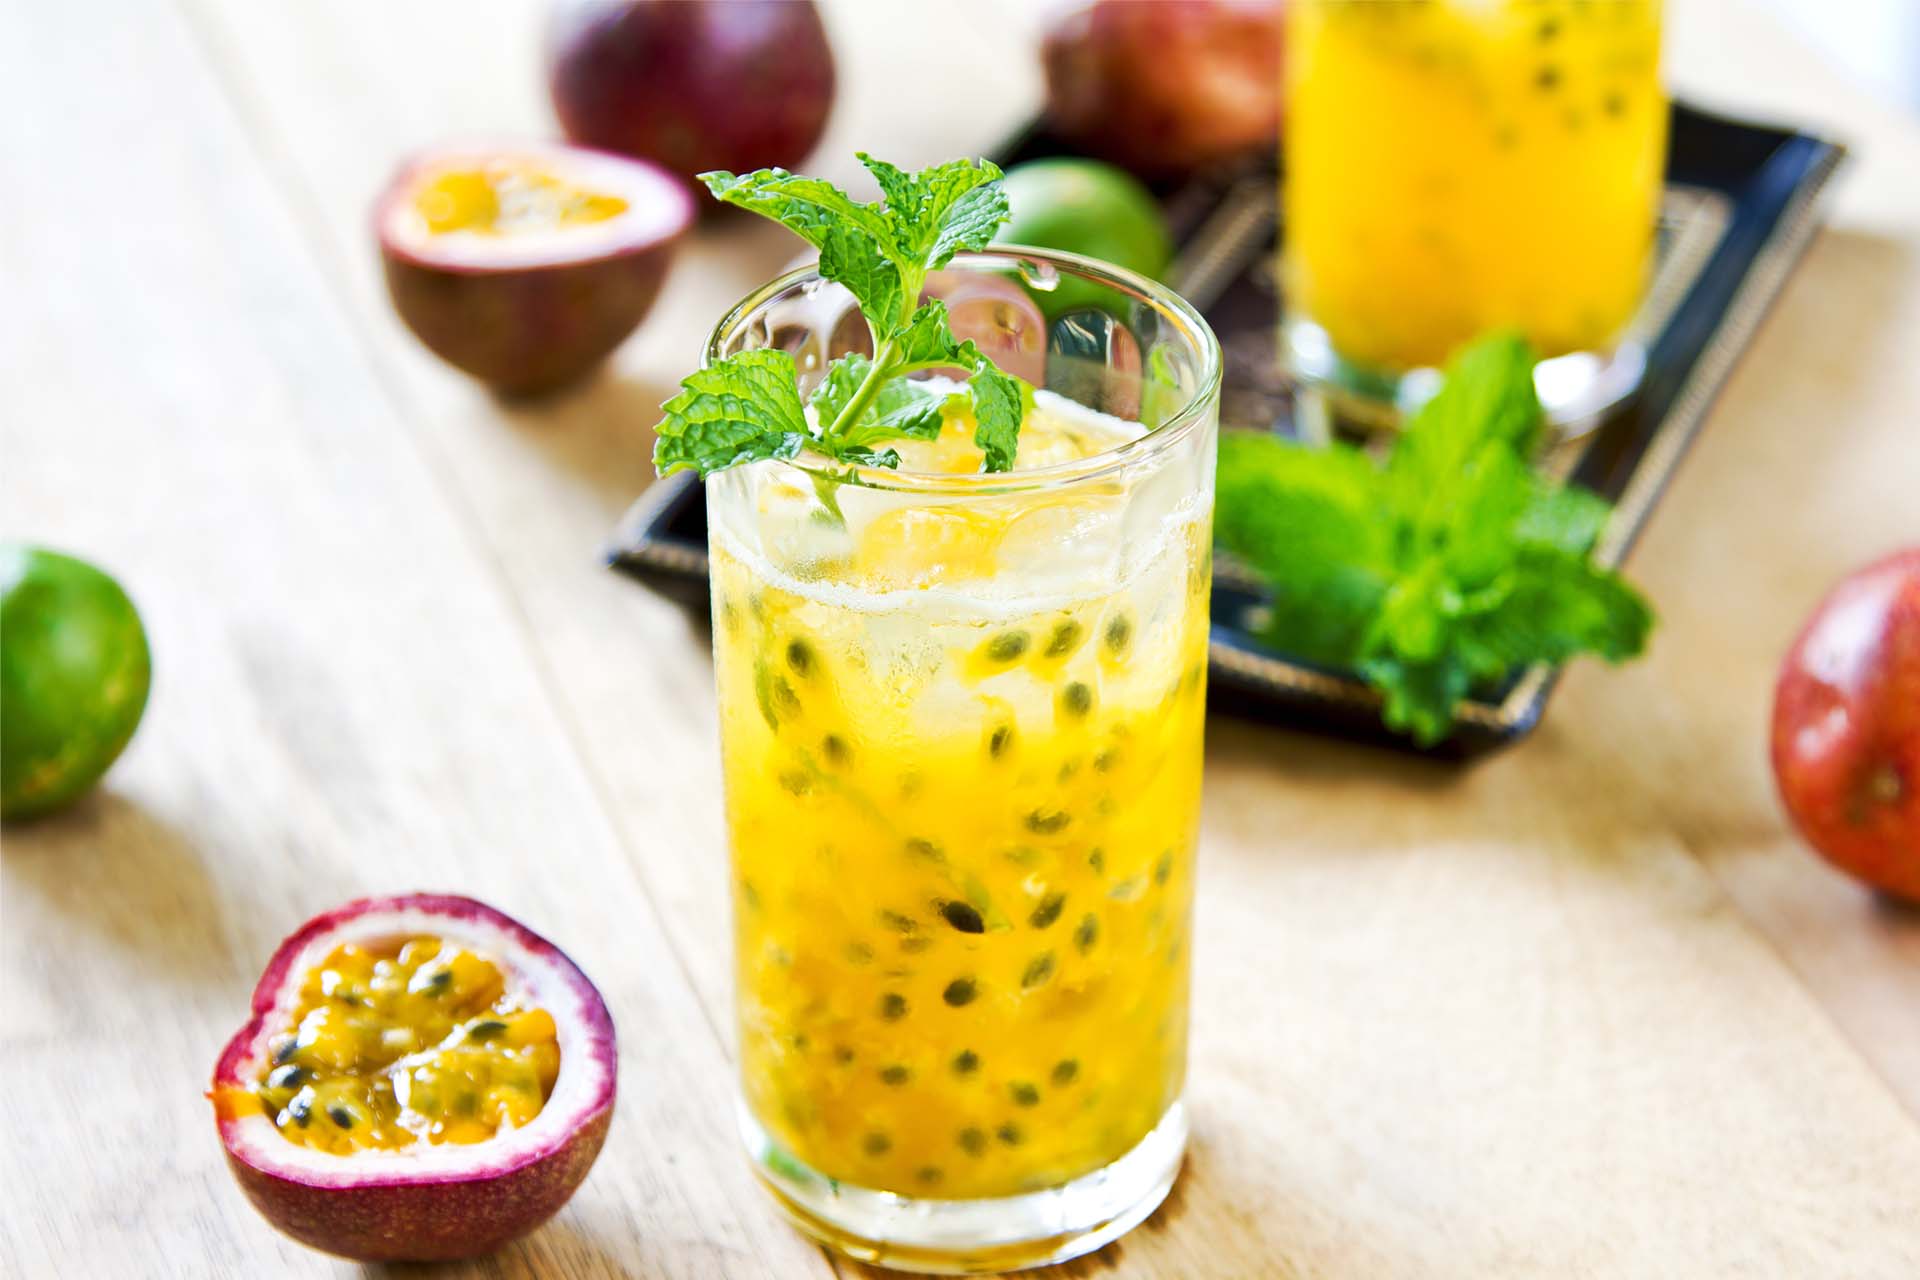 FULL OF PASSION FRUIT MOJITO IN A GLASS